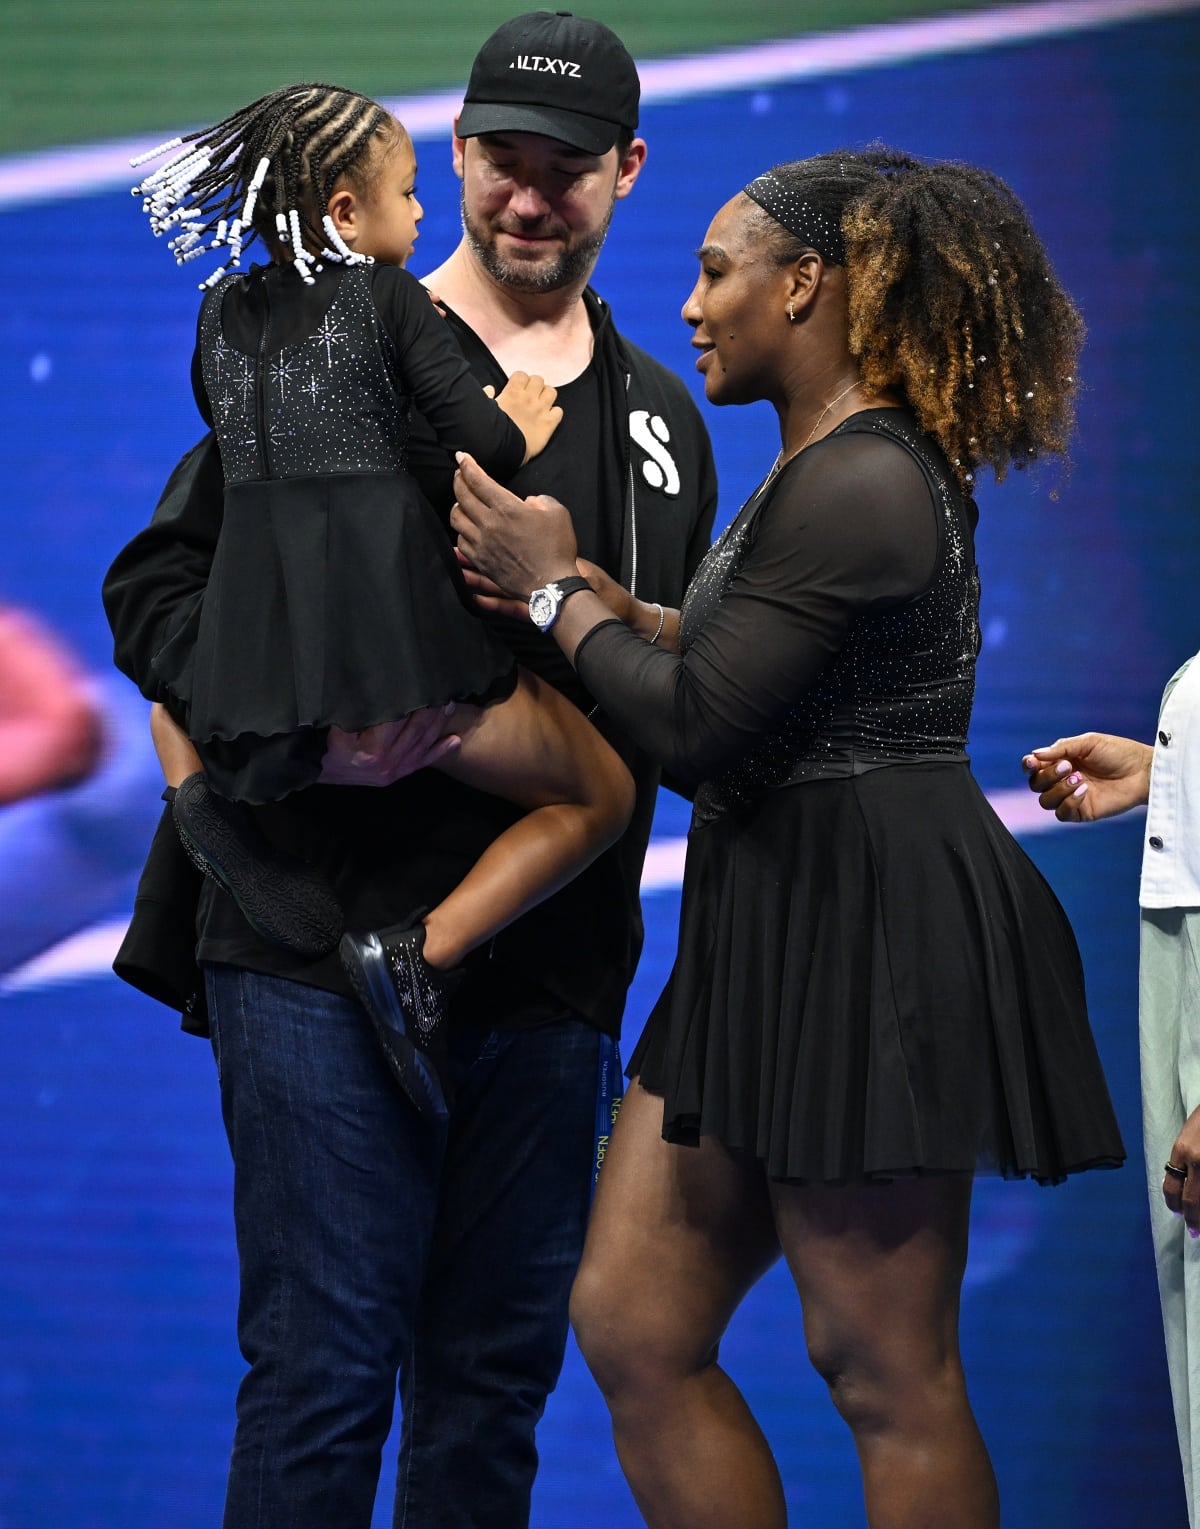 Serena Williams with husband Alexis Ohanian and daughter Olympia Williams during the 2022 US Open